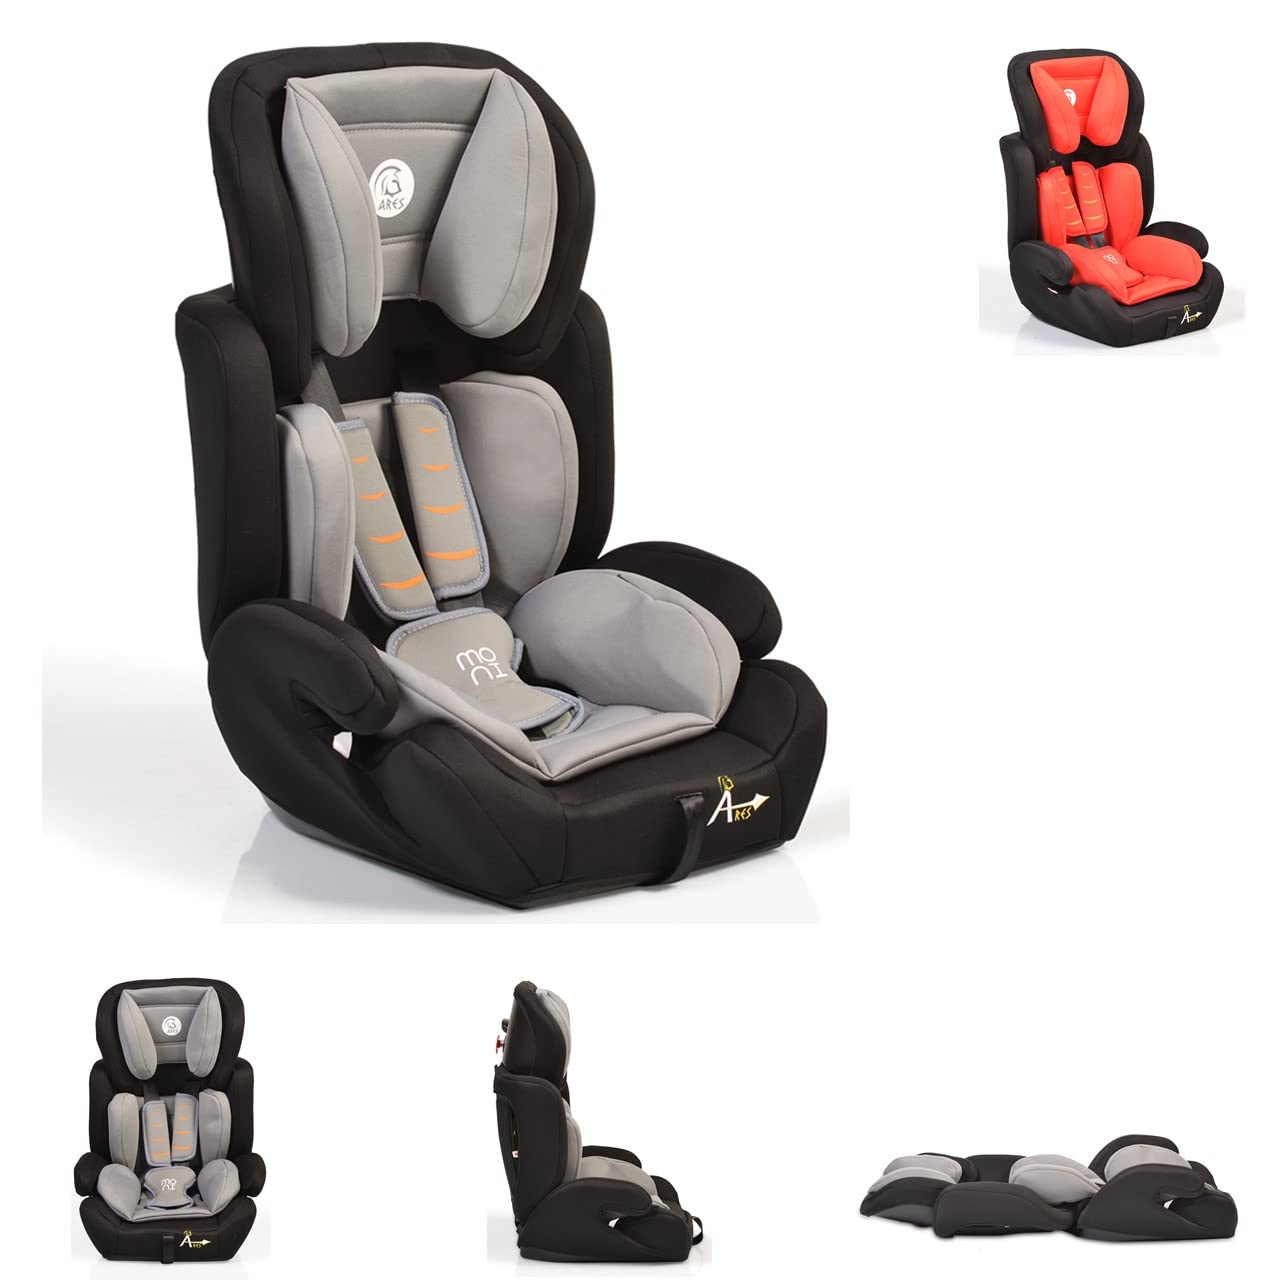 Moni Ares Child Seat Group 1/2/3 (9-36 kg) 1 to 12 Years Removable Backrest Red